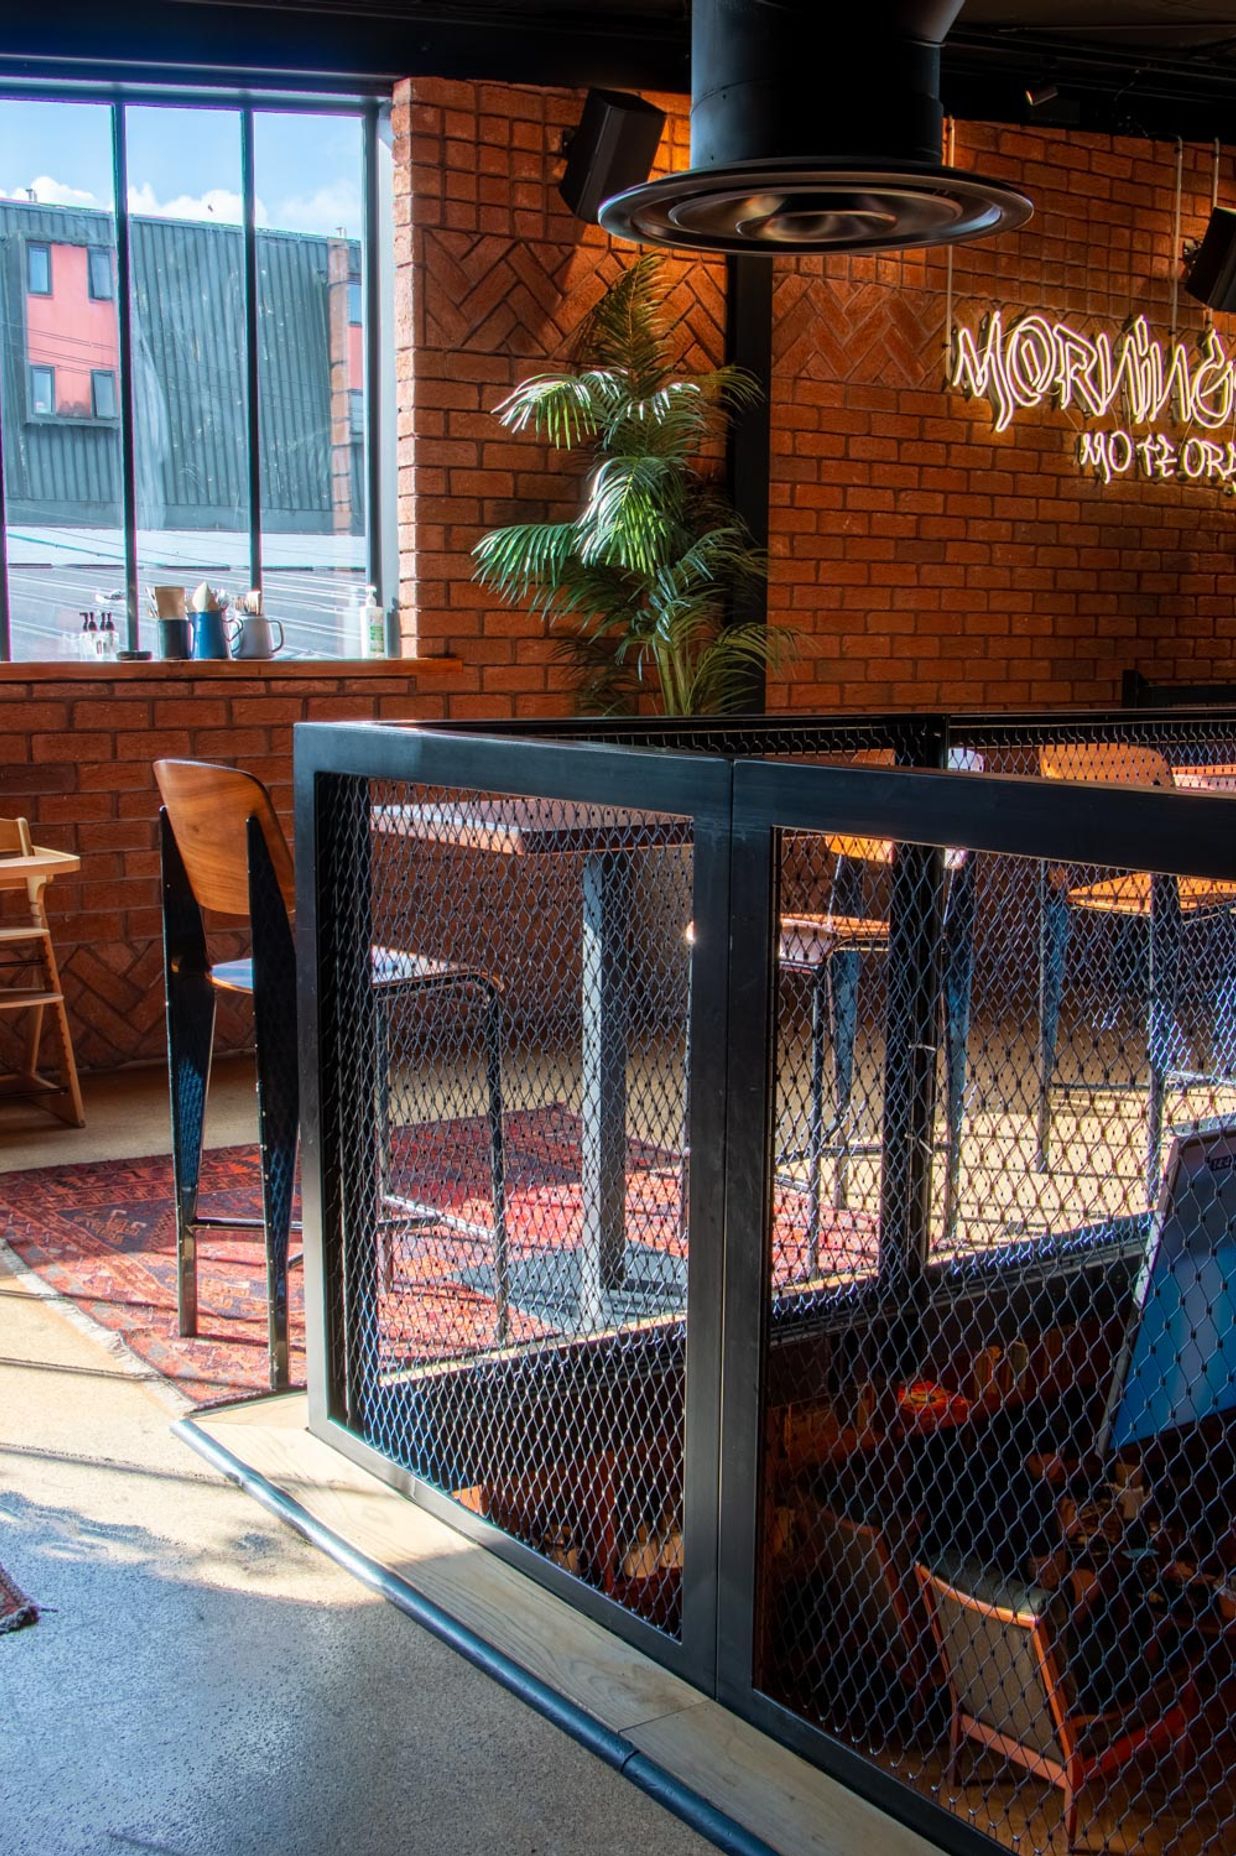 Morningside Tavern Balustrades and mesh ceiling feature